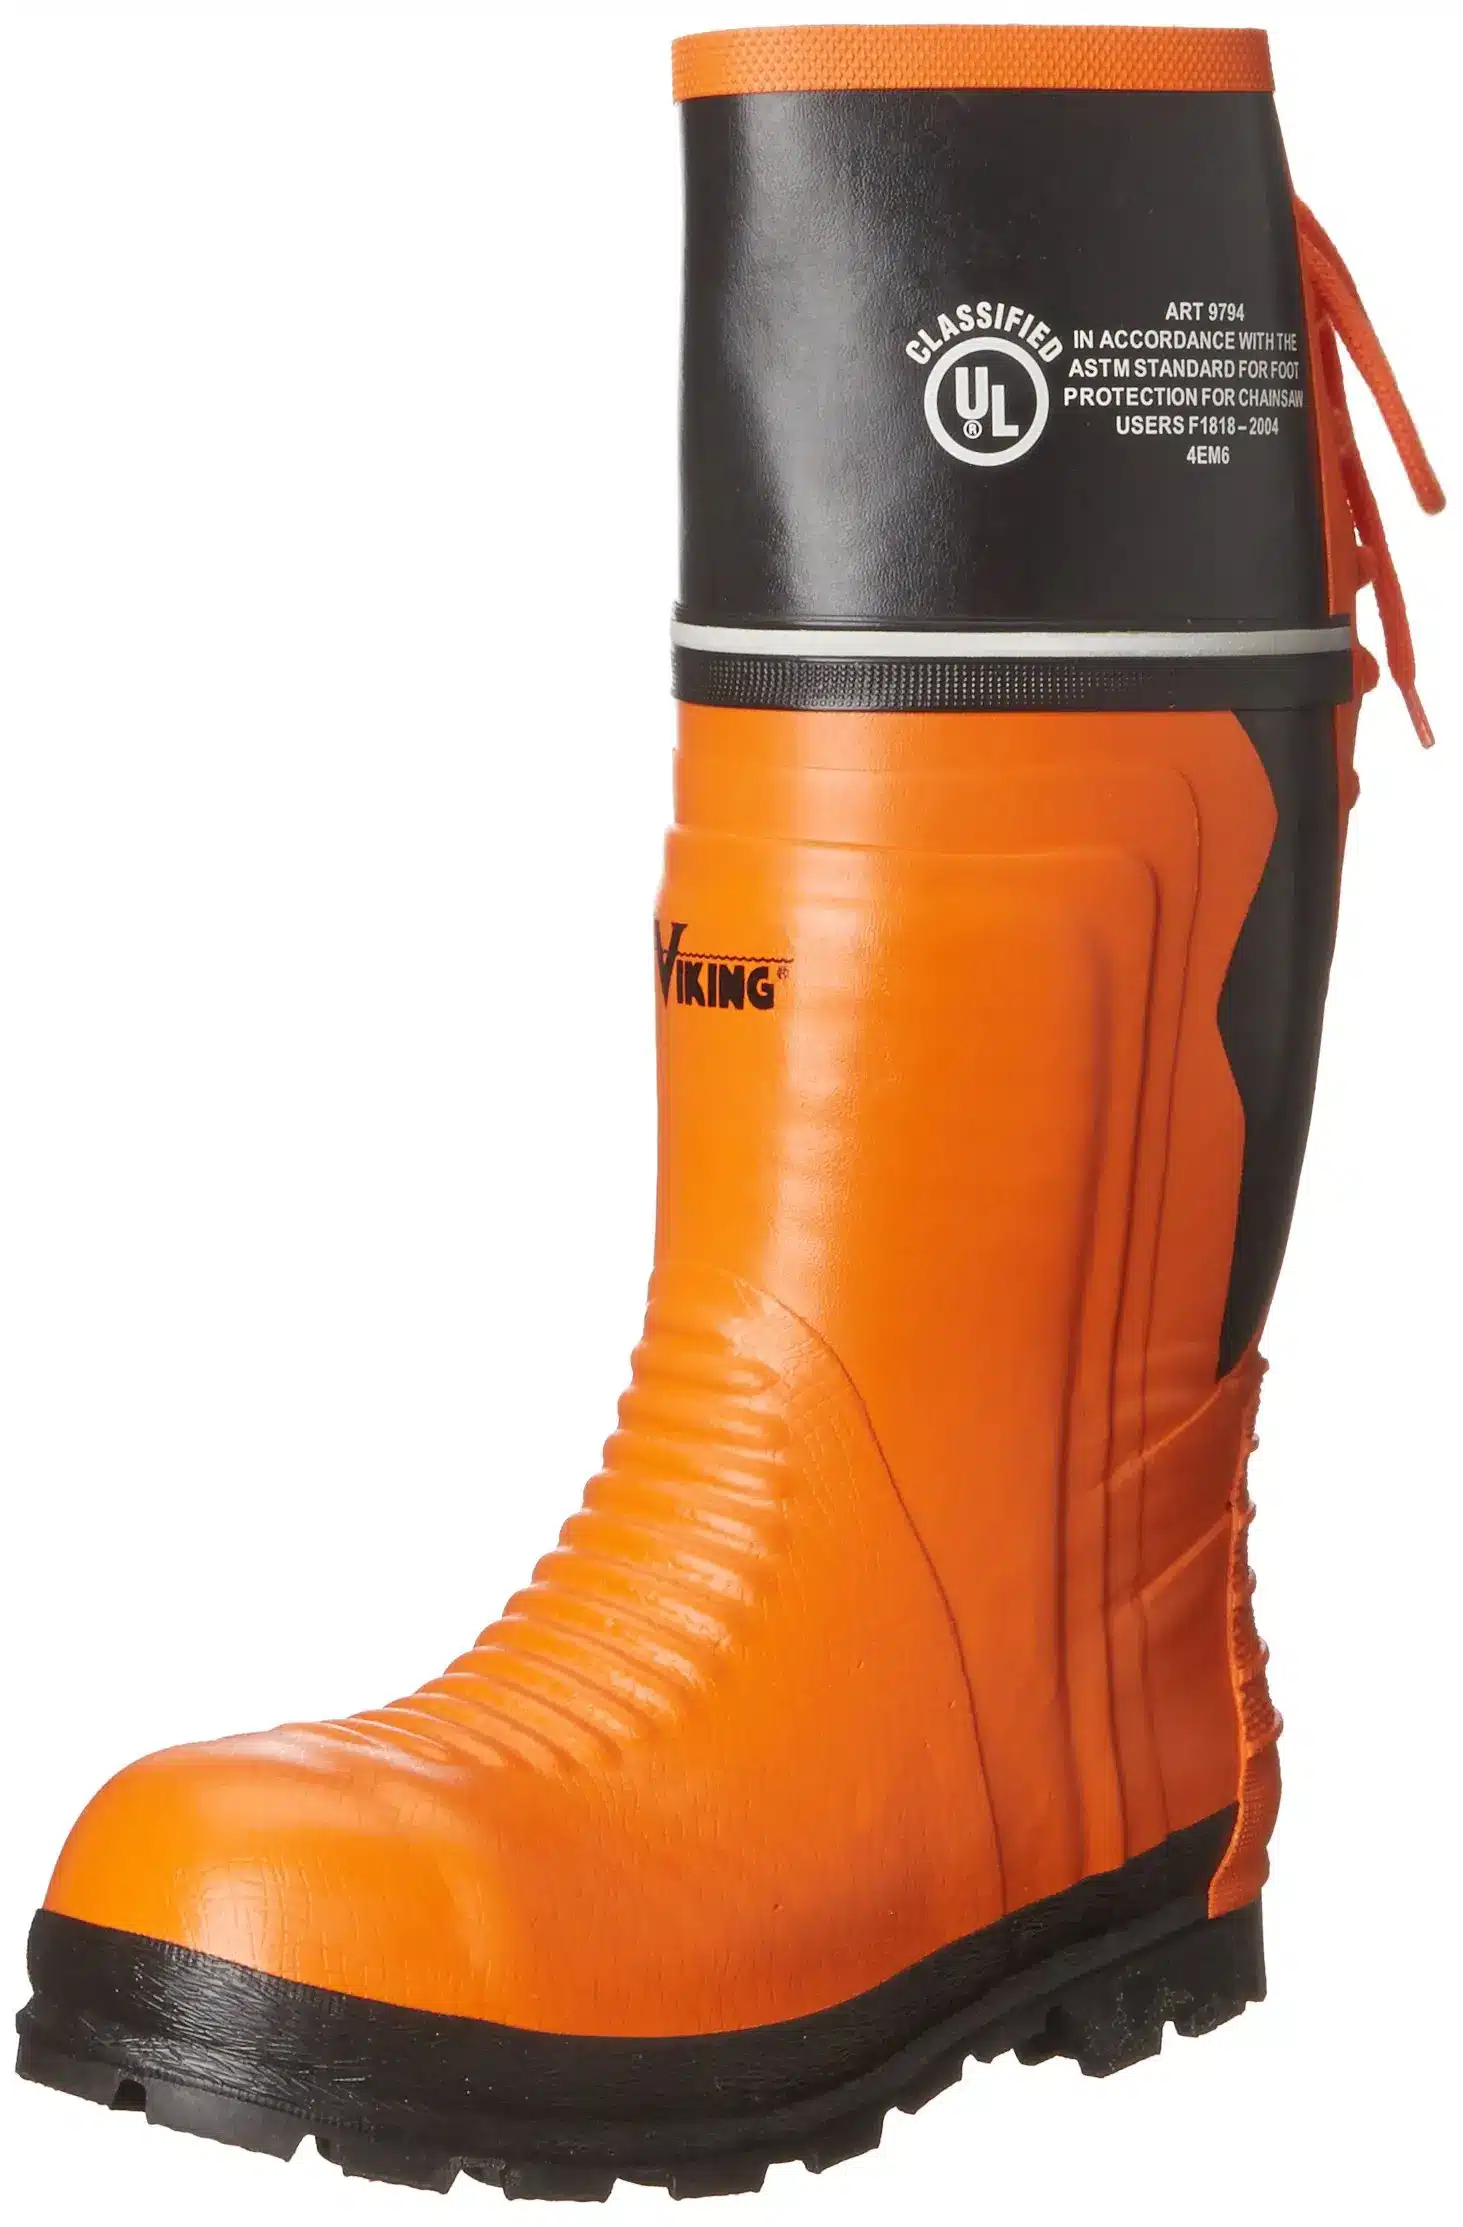 Viking steel toe boots for use with a chainsaw